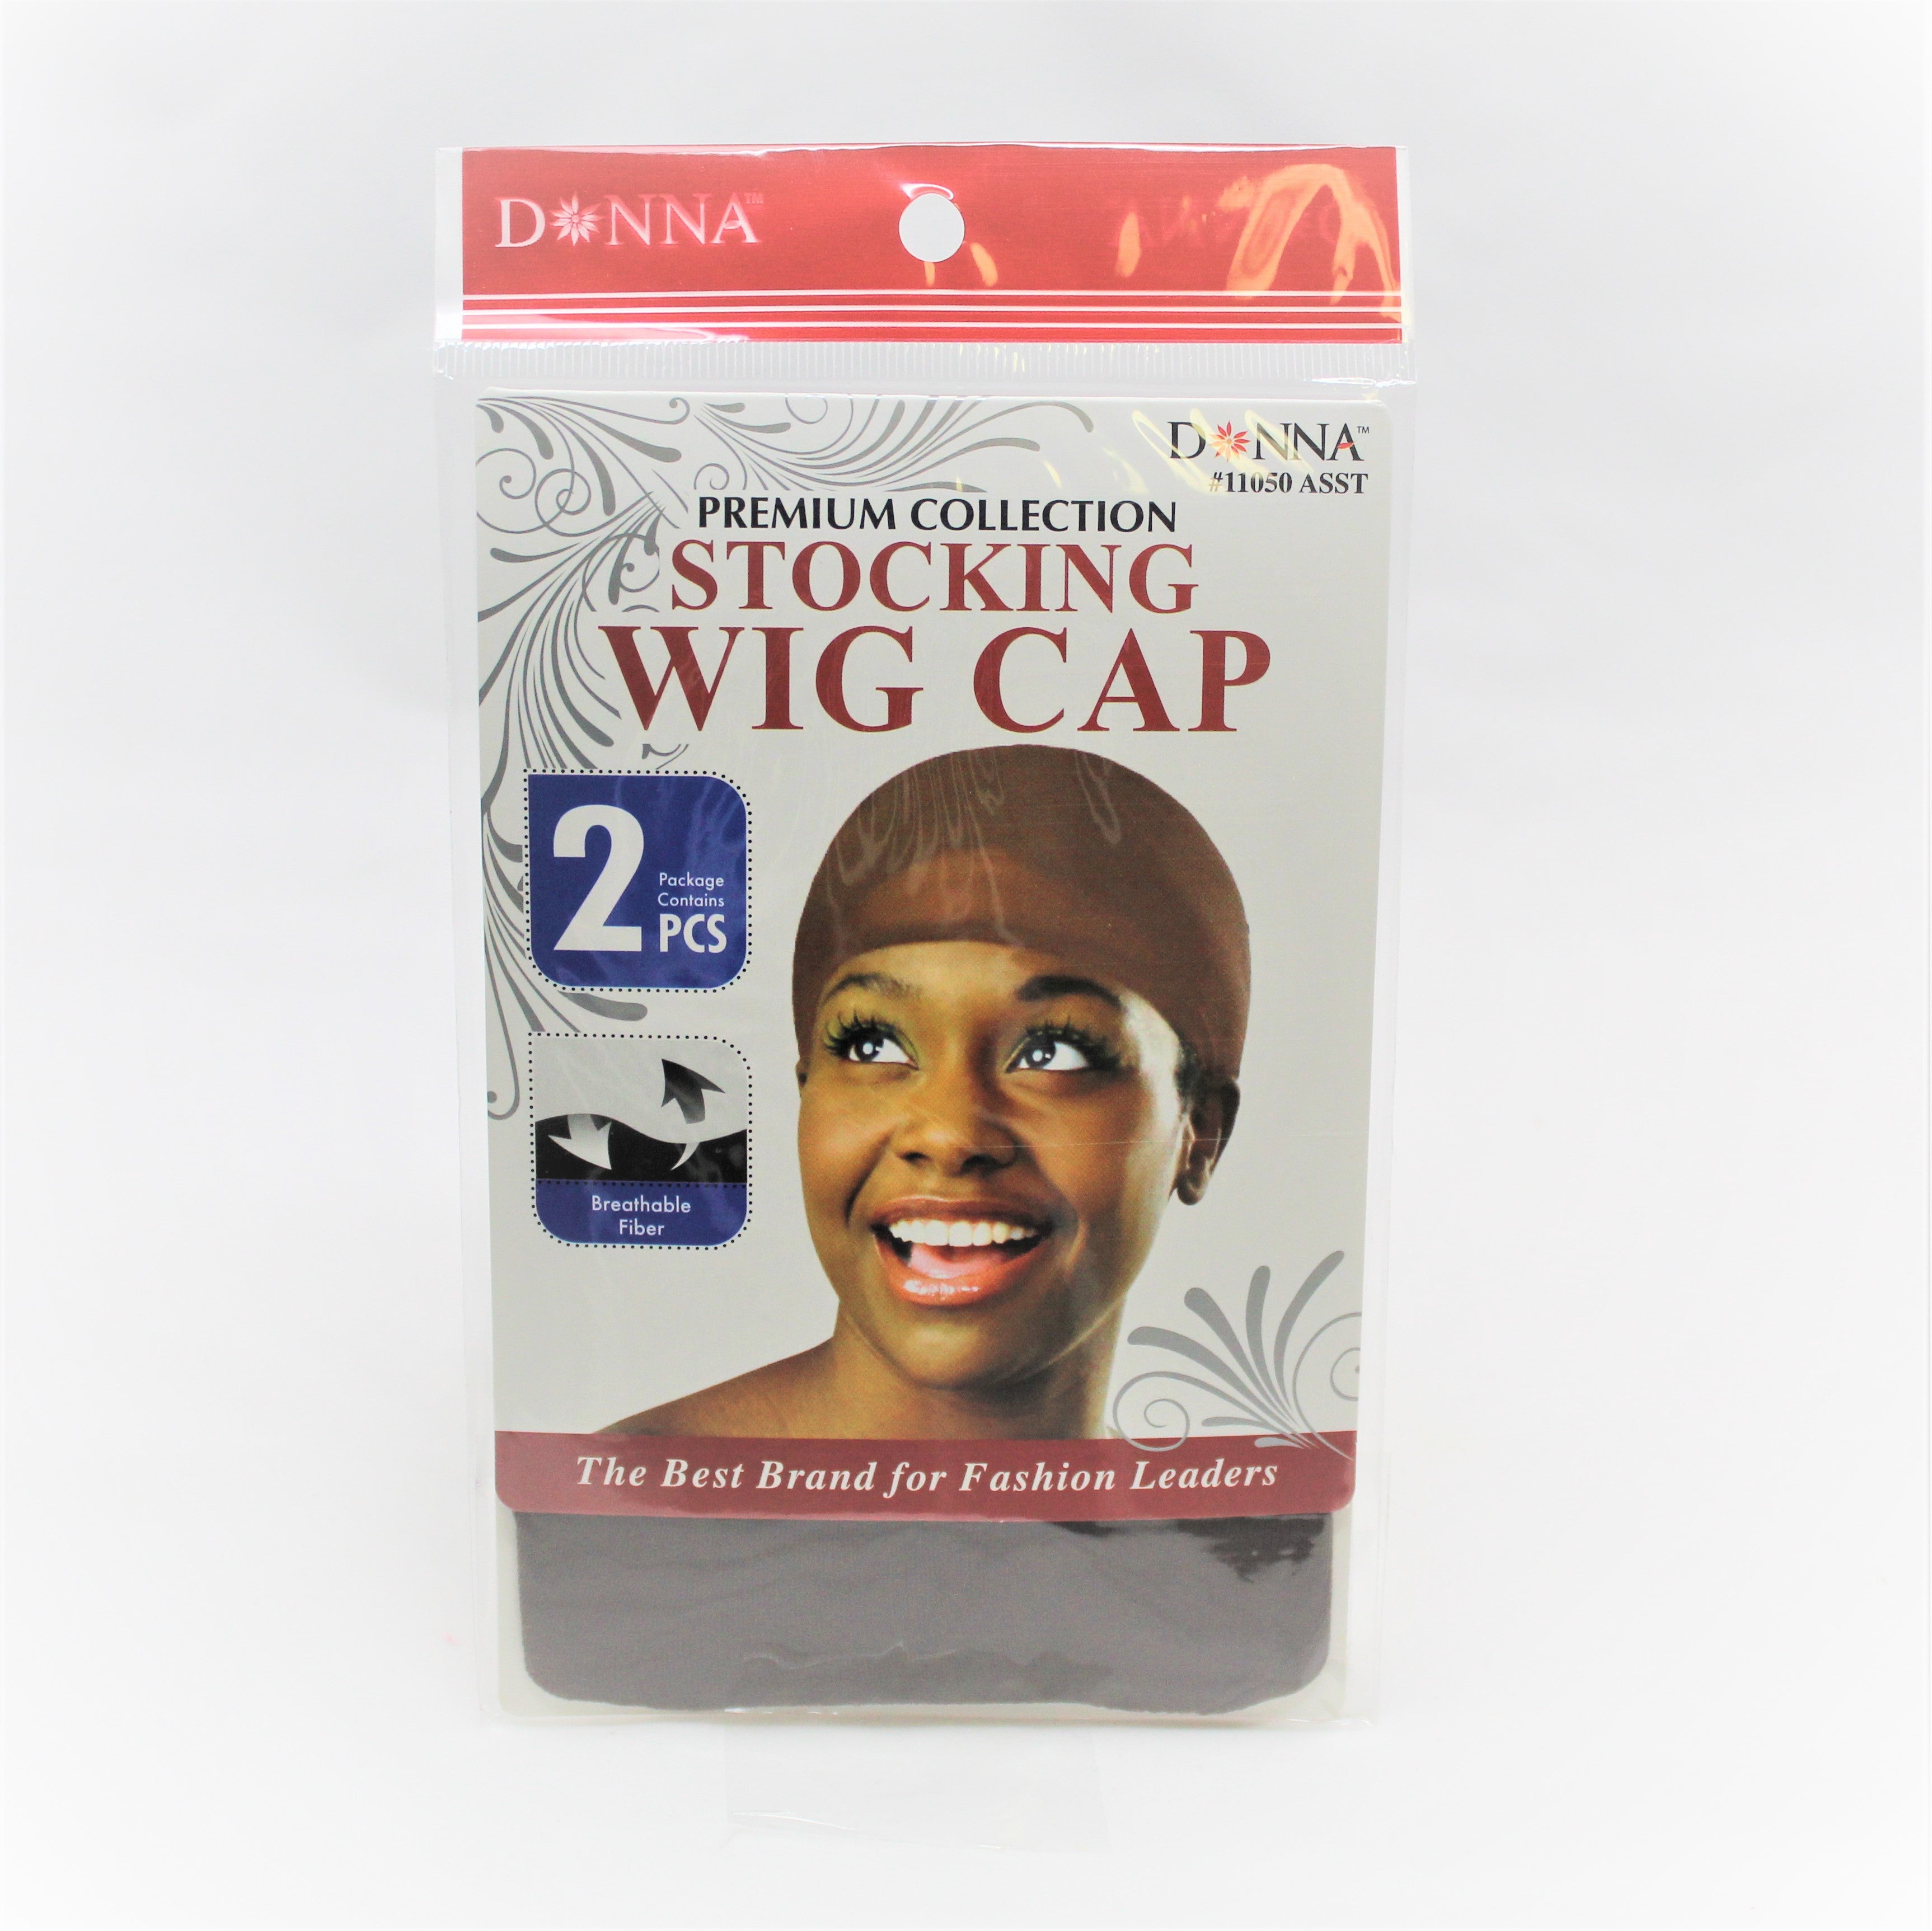 Donna Premium Collection Stocking Wig Cap #11050 - Beauty Bar & Supply